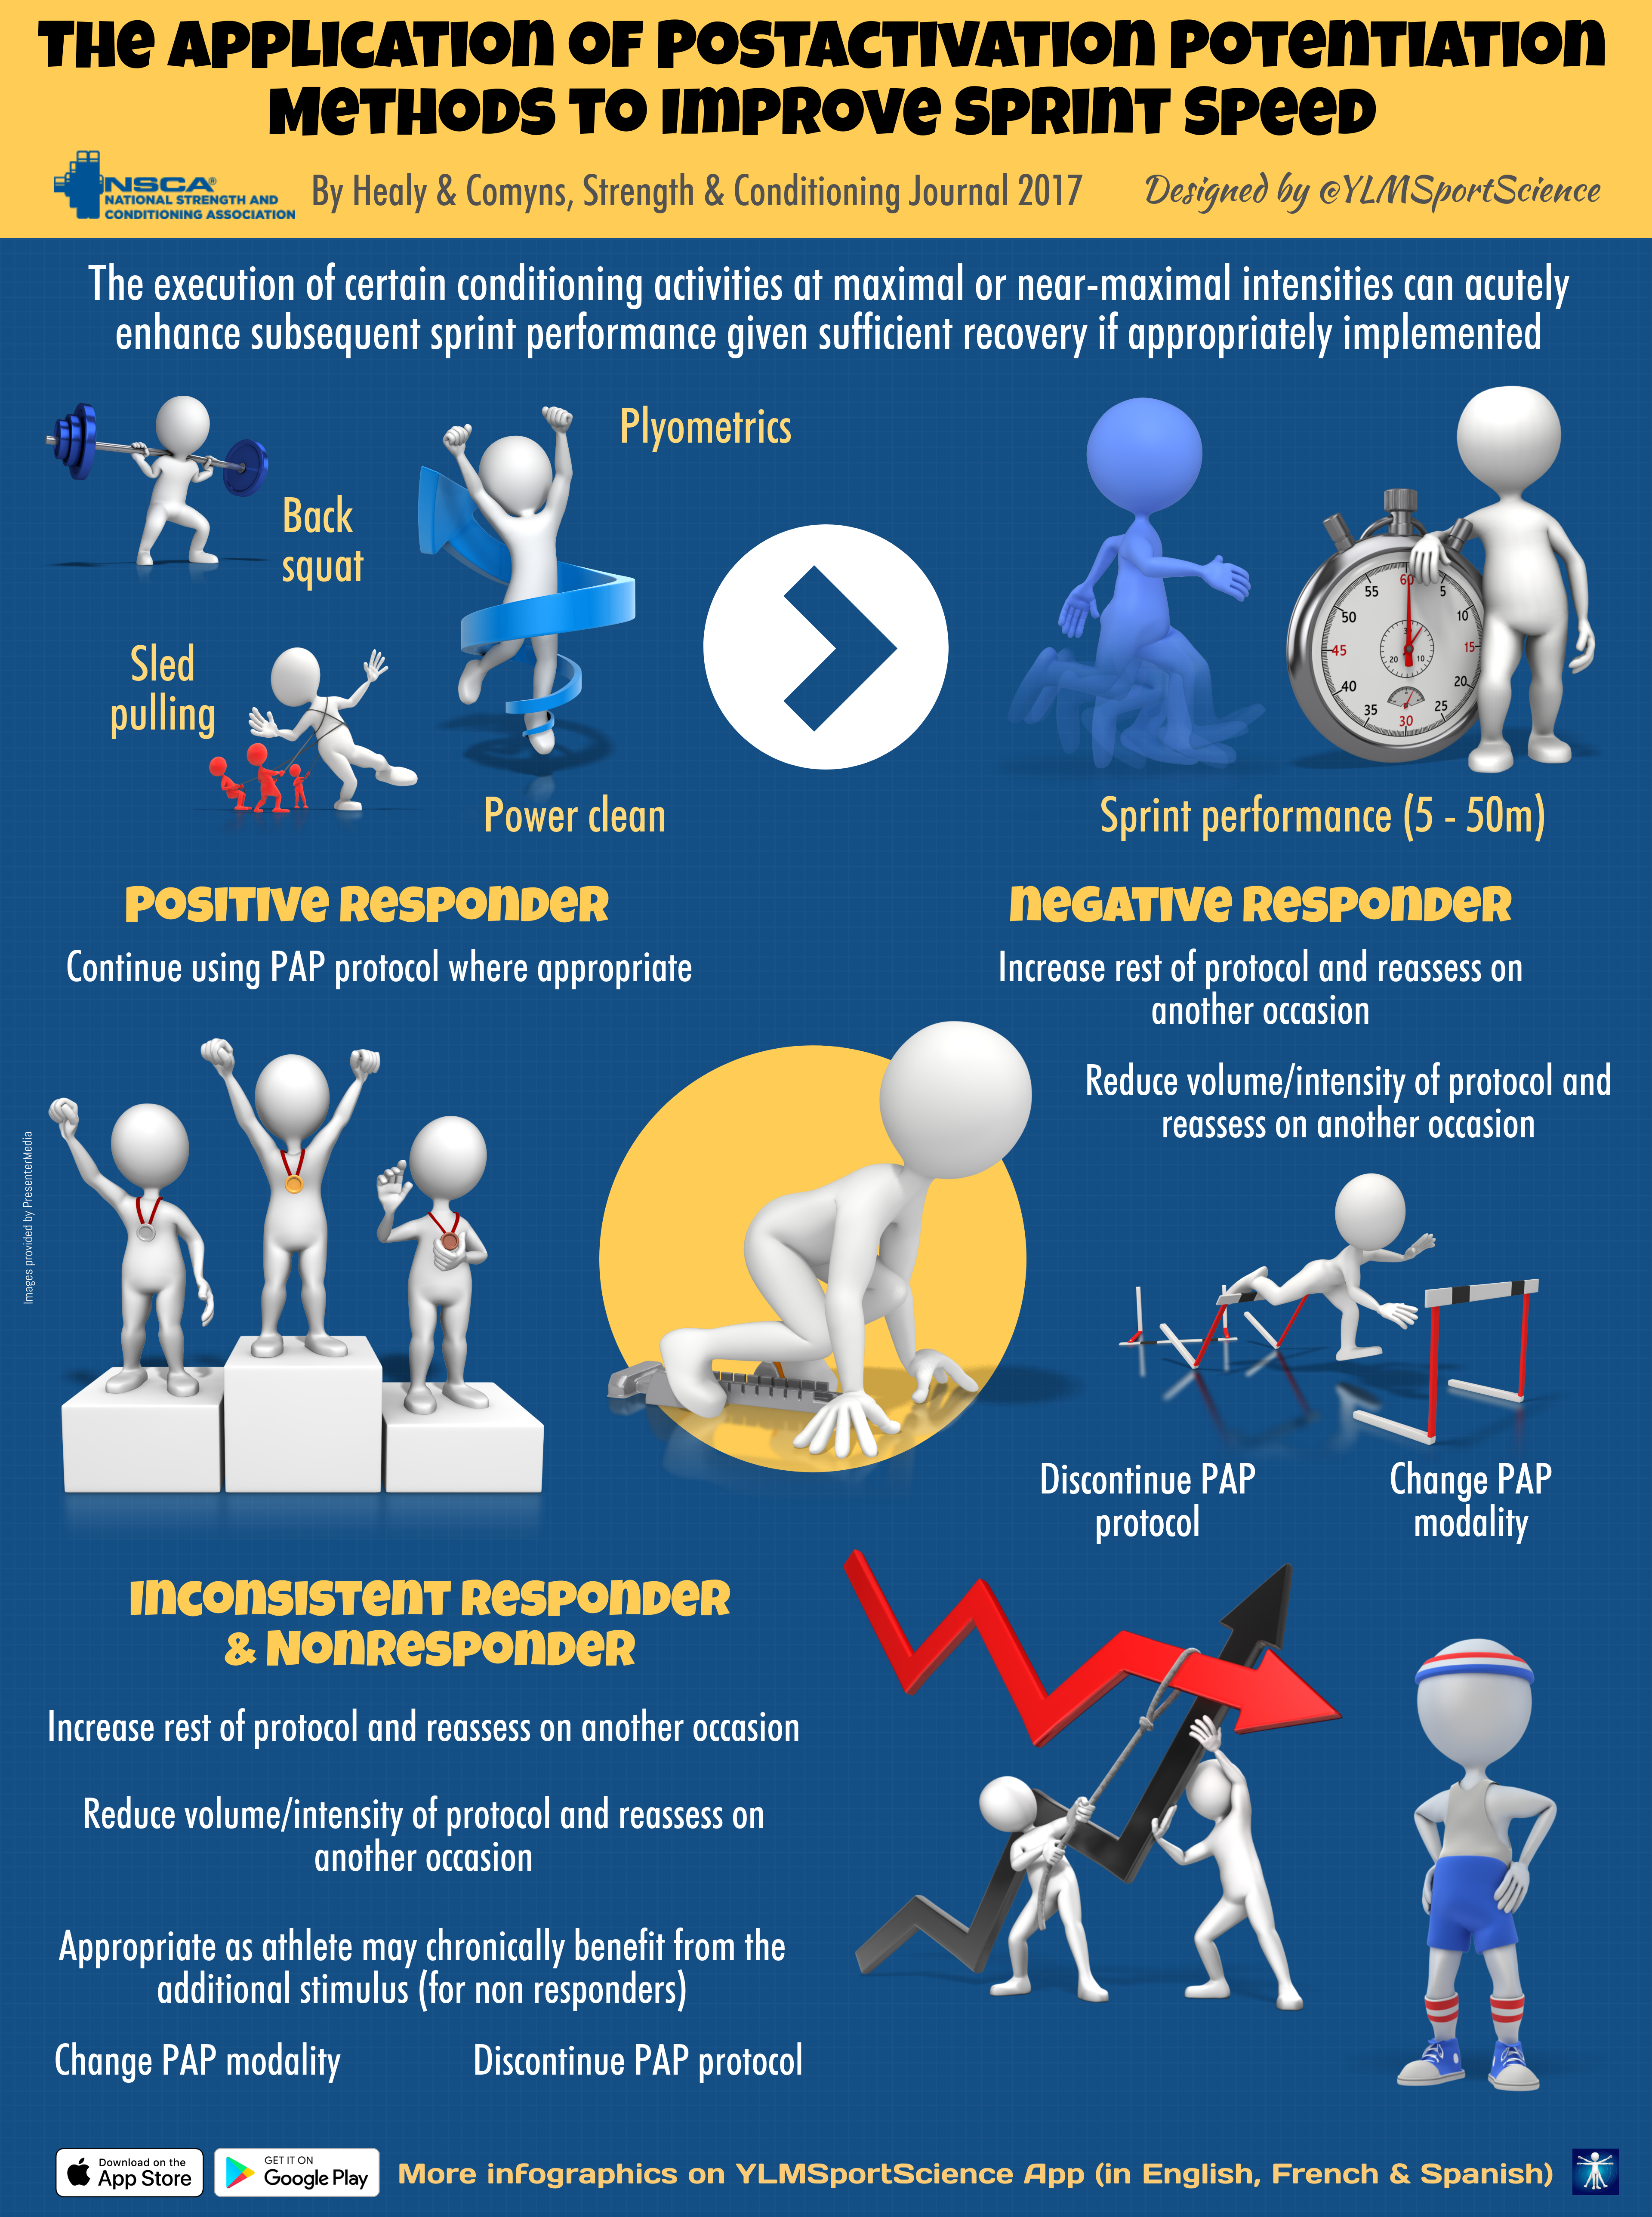 The Application of Post-activation Potentiation Methods to Improve Sprint Speed